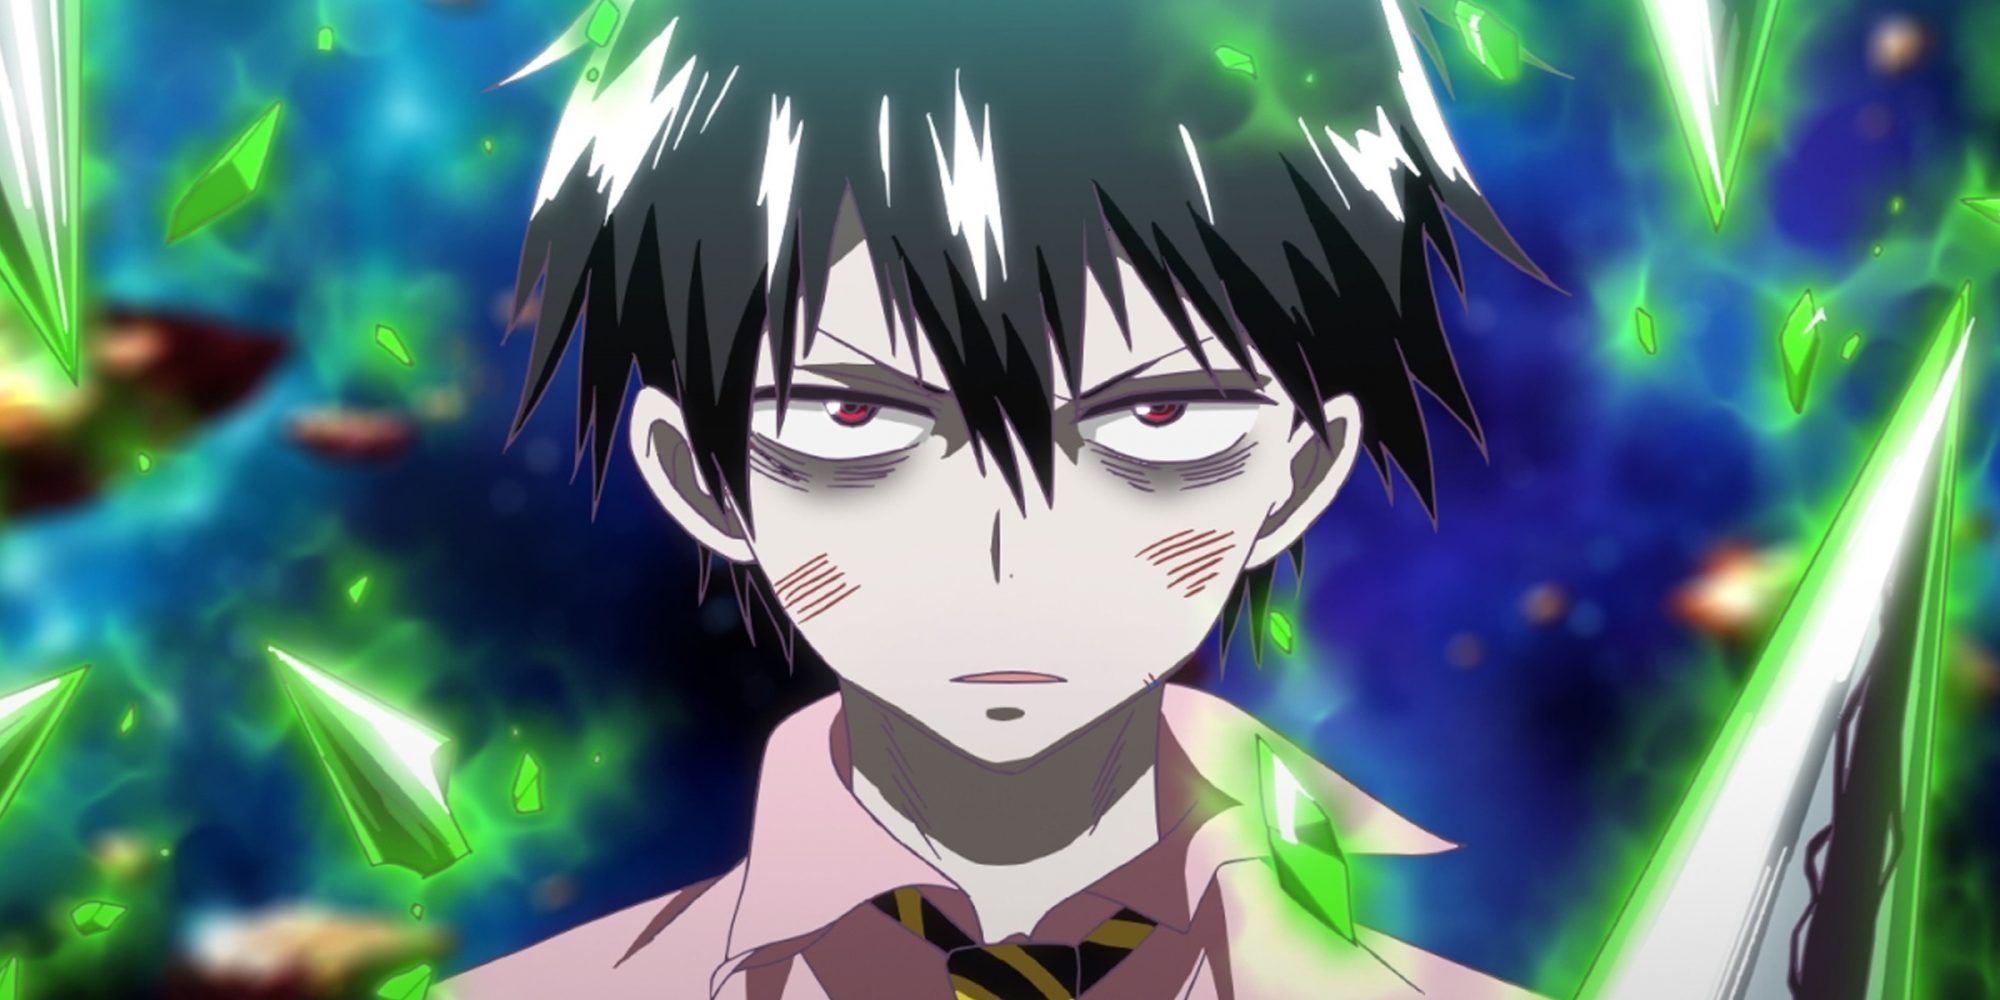 Blood Lad: Where to Watch & Read the Series